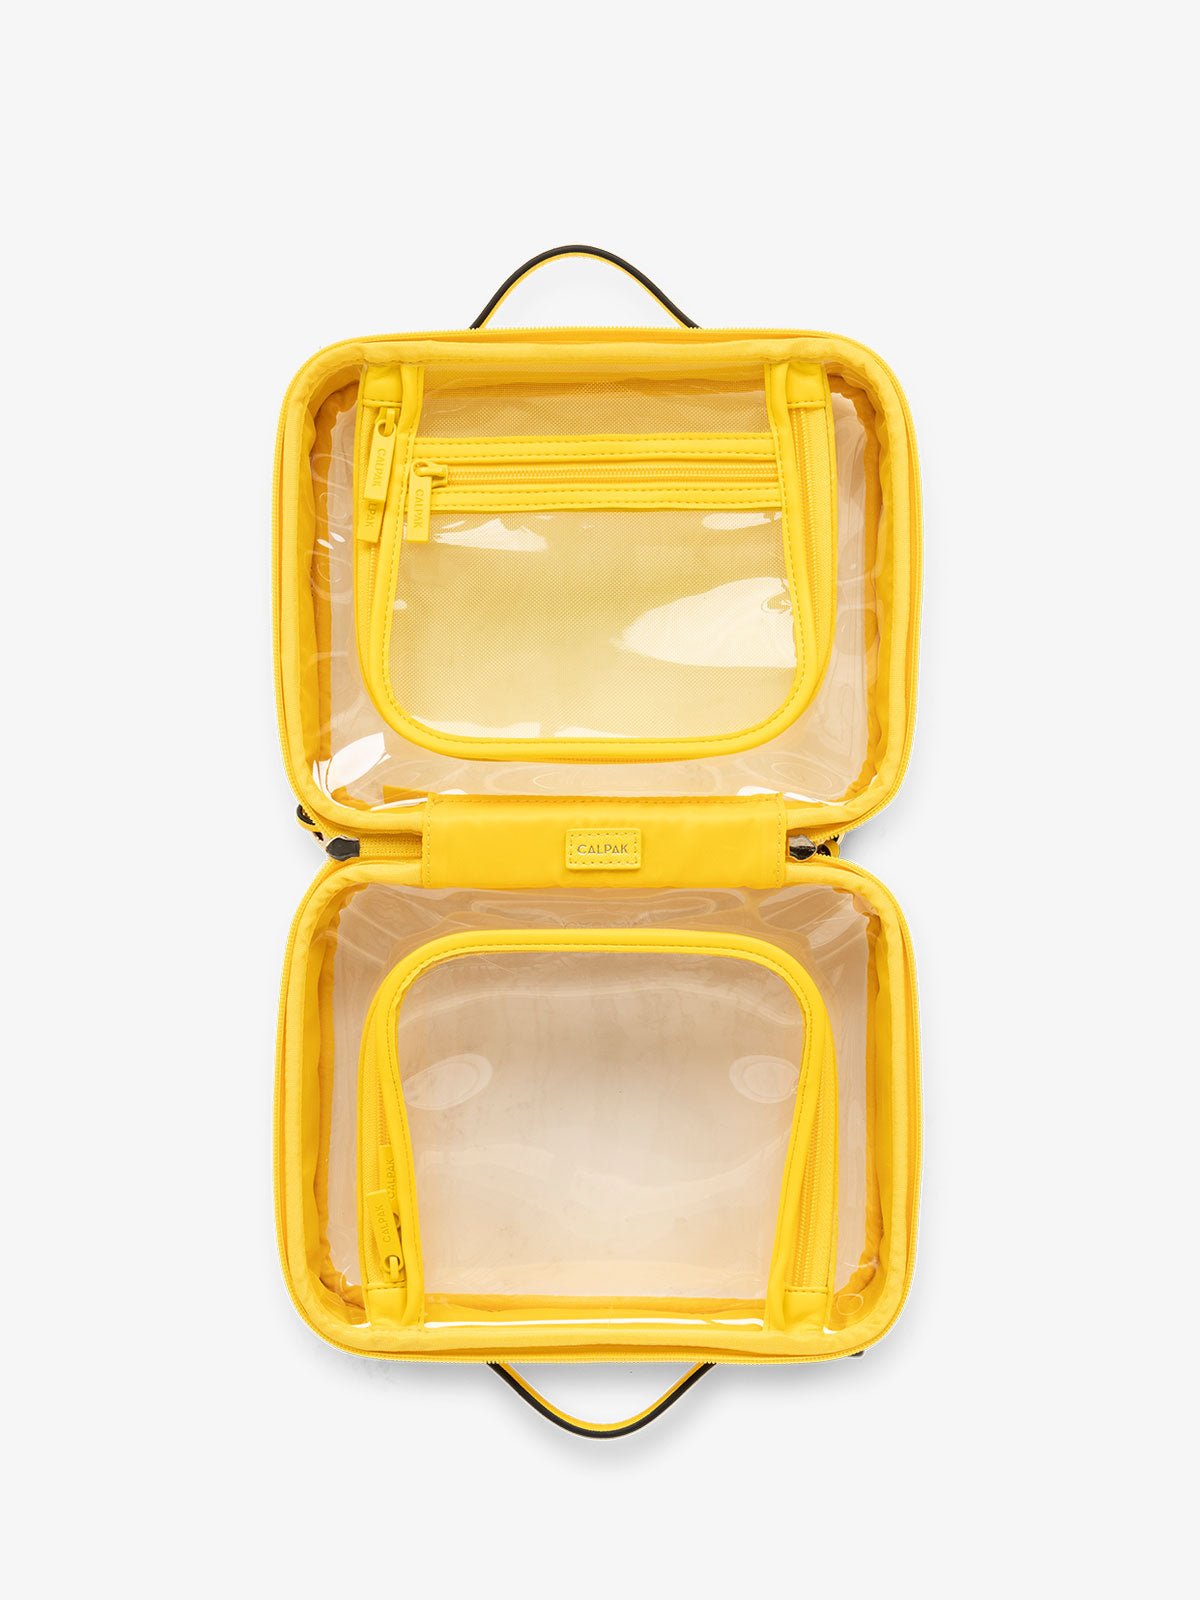 CALPAK clear travel makeup bag with zipper enclosed compartments in bright yellow